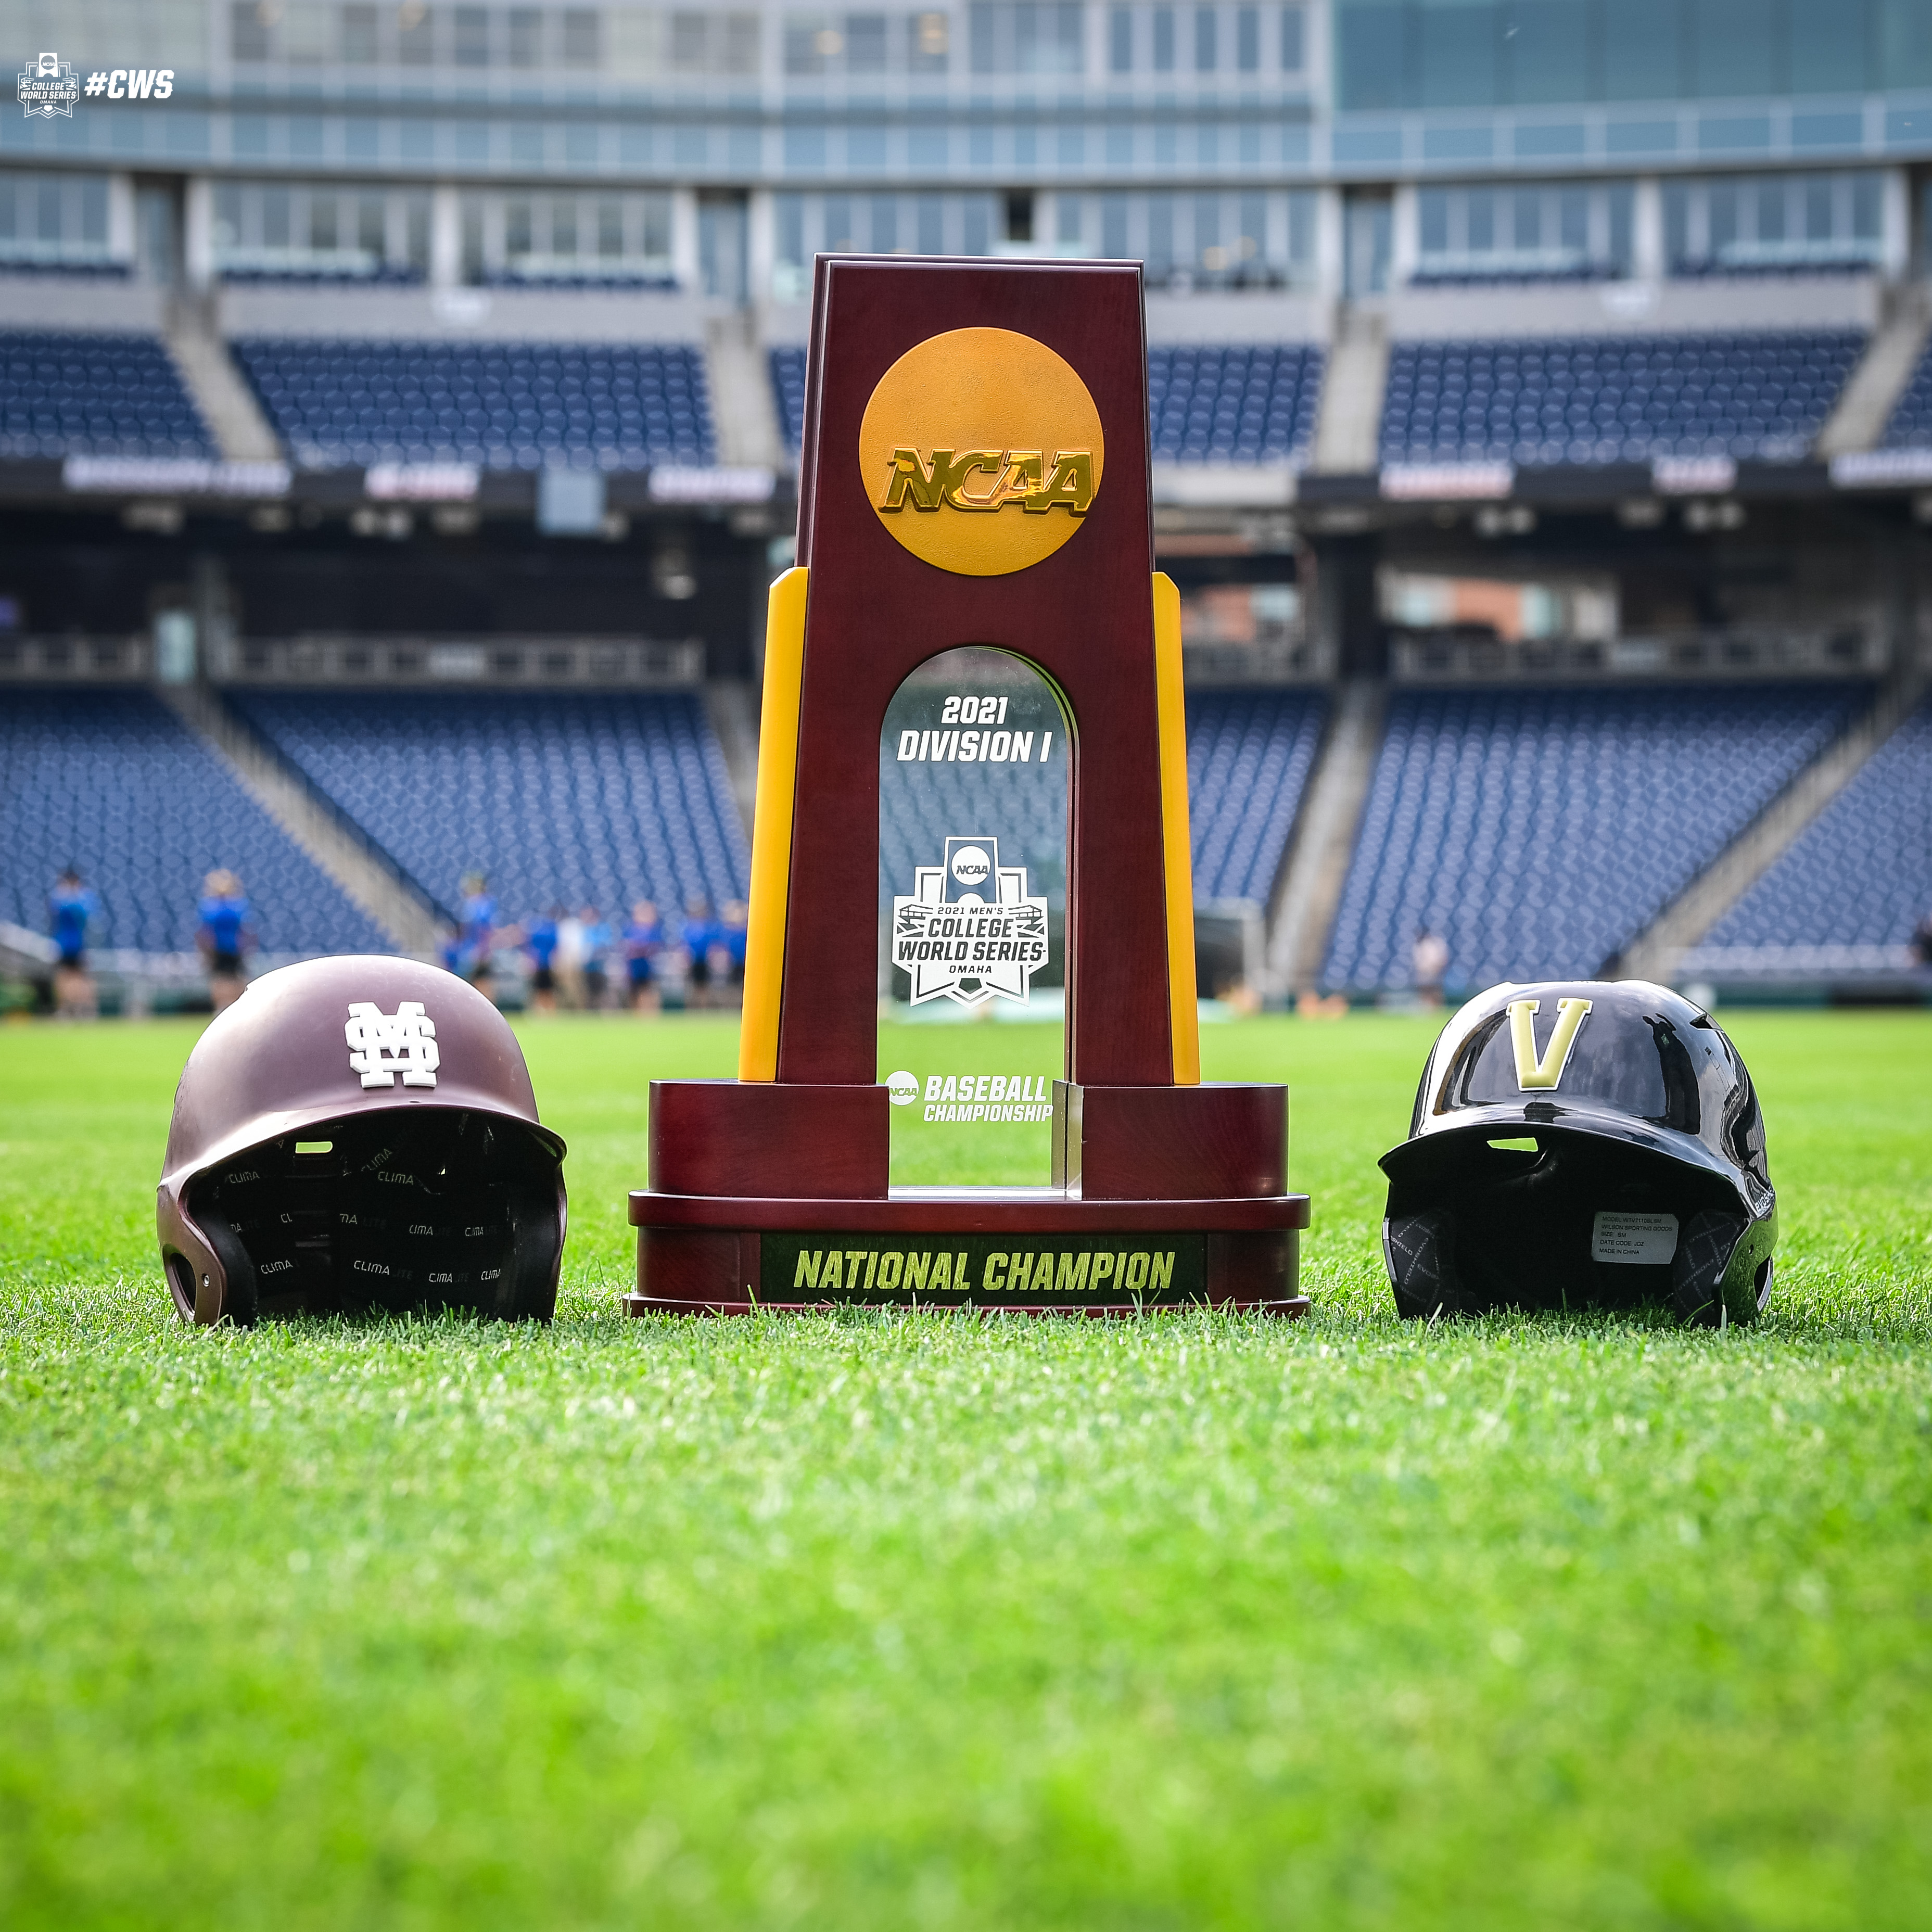 NCAA Baseball on X: The National Champion trophy is here! 🏆 #CWS